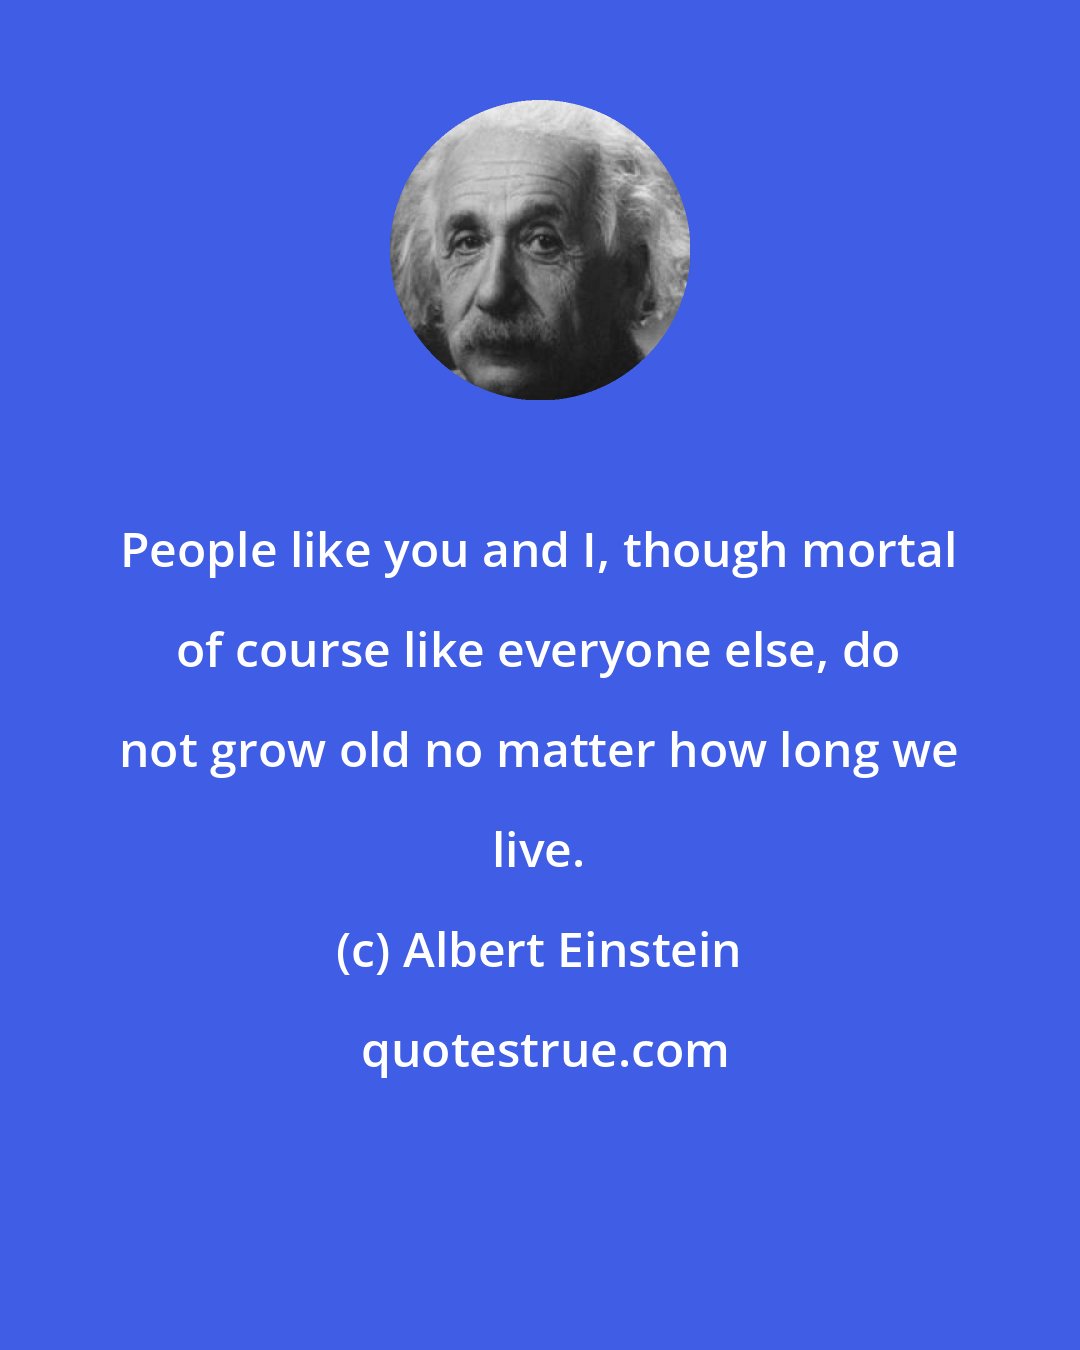 Albert Einstein: People like you and I, though mortal of course like everyone else, do not grow old no matter how long we live.